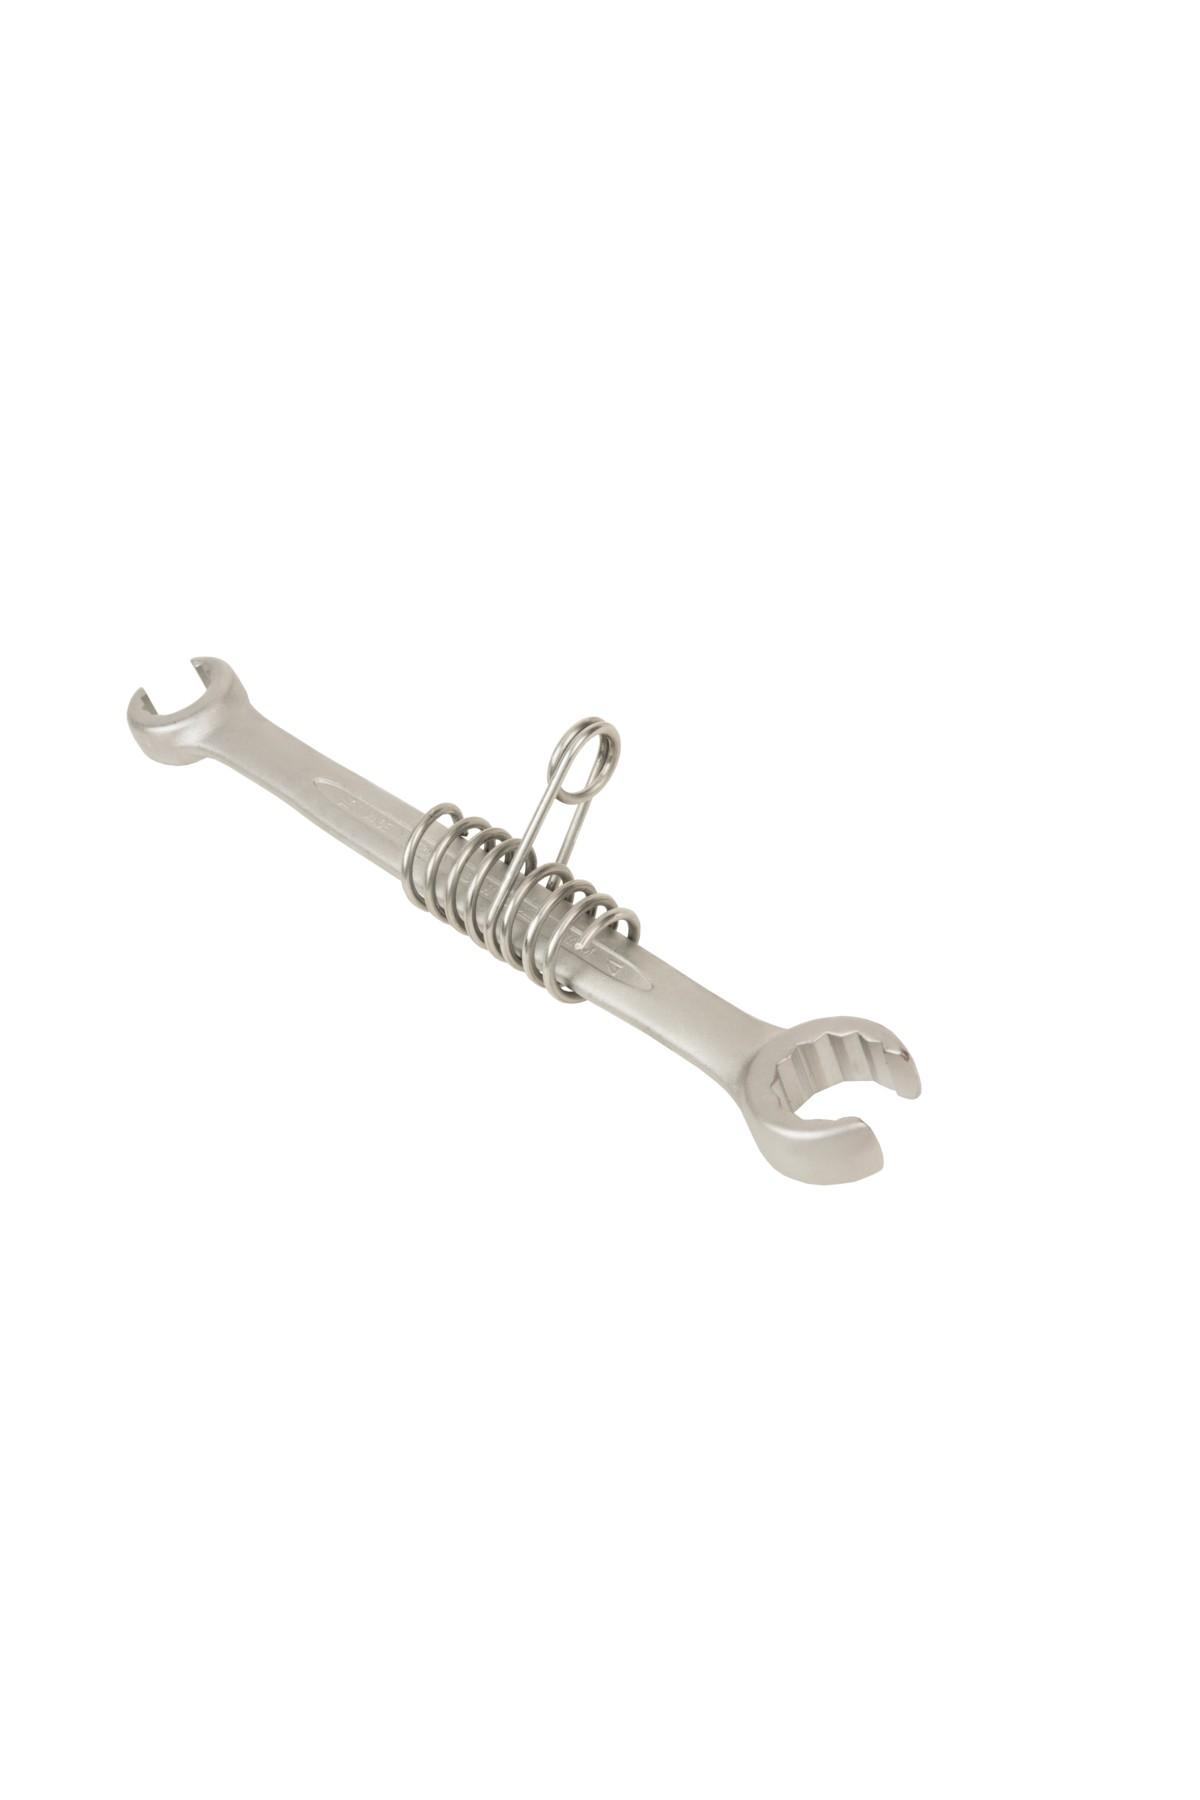 Open ring spanner 10-11mm height-secured